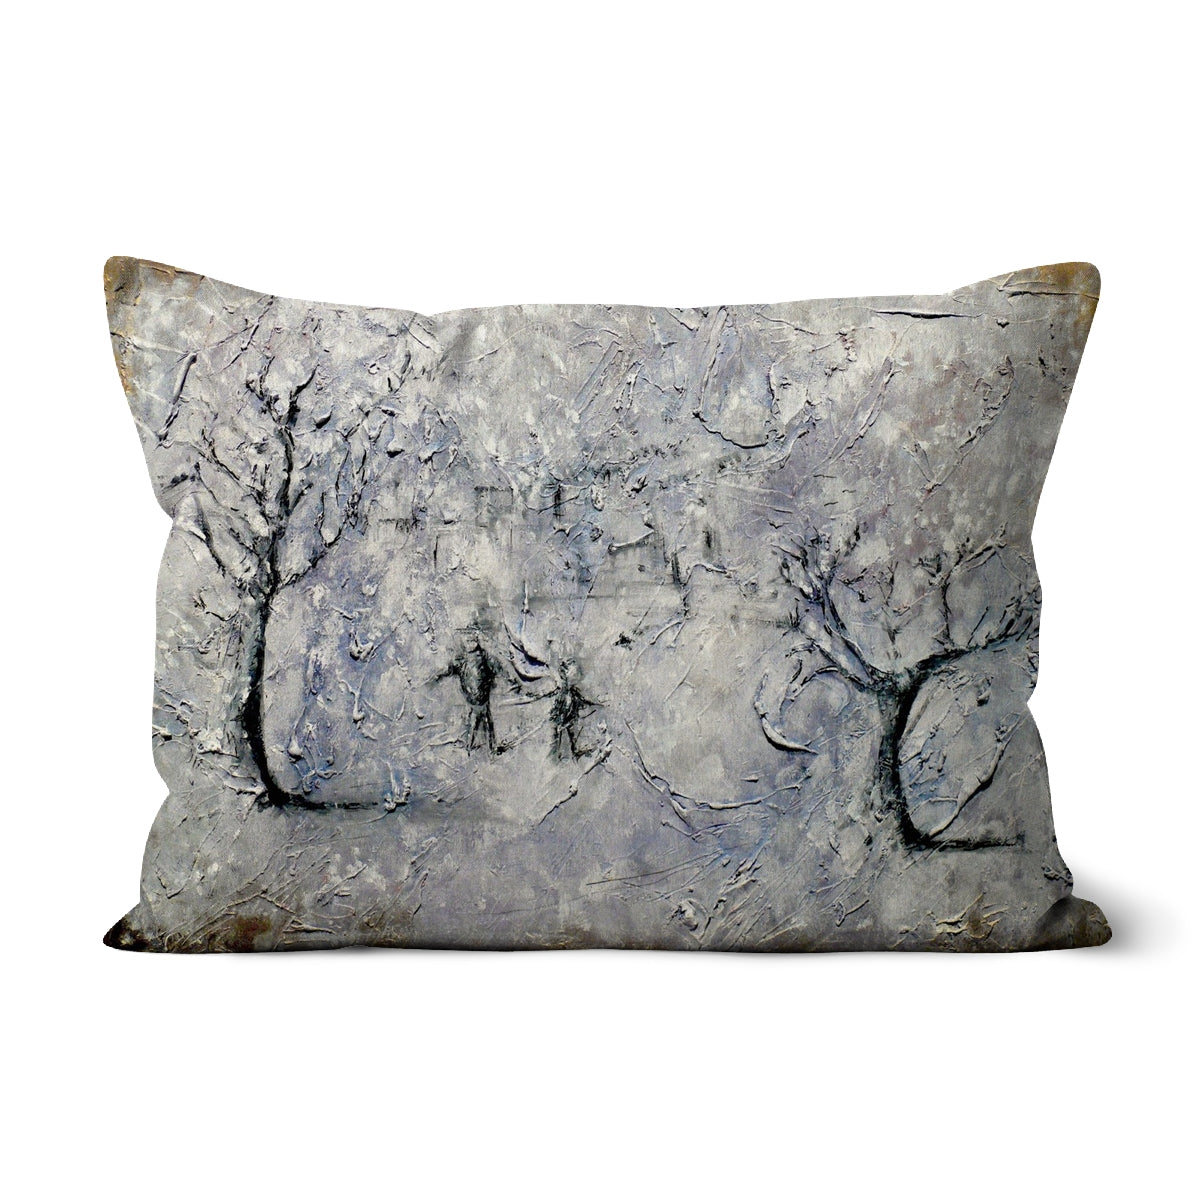 Father Daughter Snow Art Gifts Cushion-Cushions-Abstract & Impressionistic Art Gallery-Faux Suede-19"x13"-Paintings, Prints, Homeware, Art Gifts From Scotland By Scottish Artist Kevin Hunter